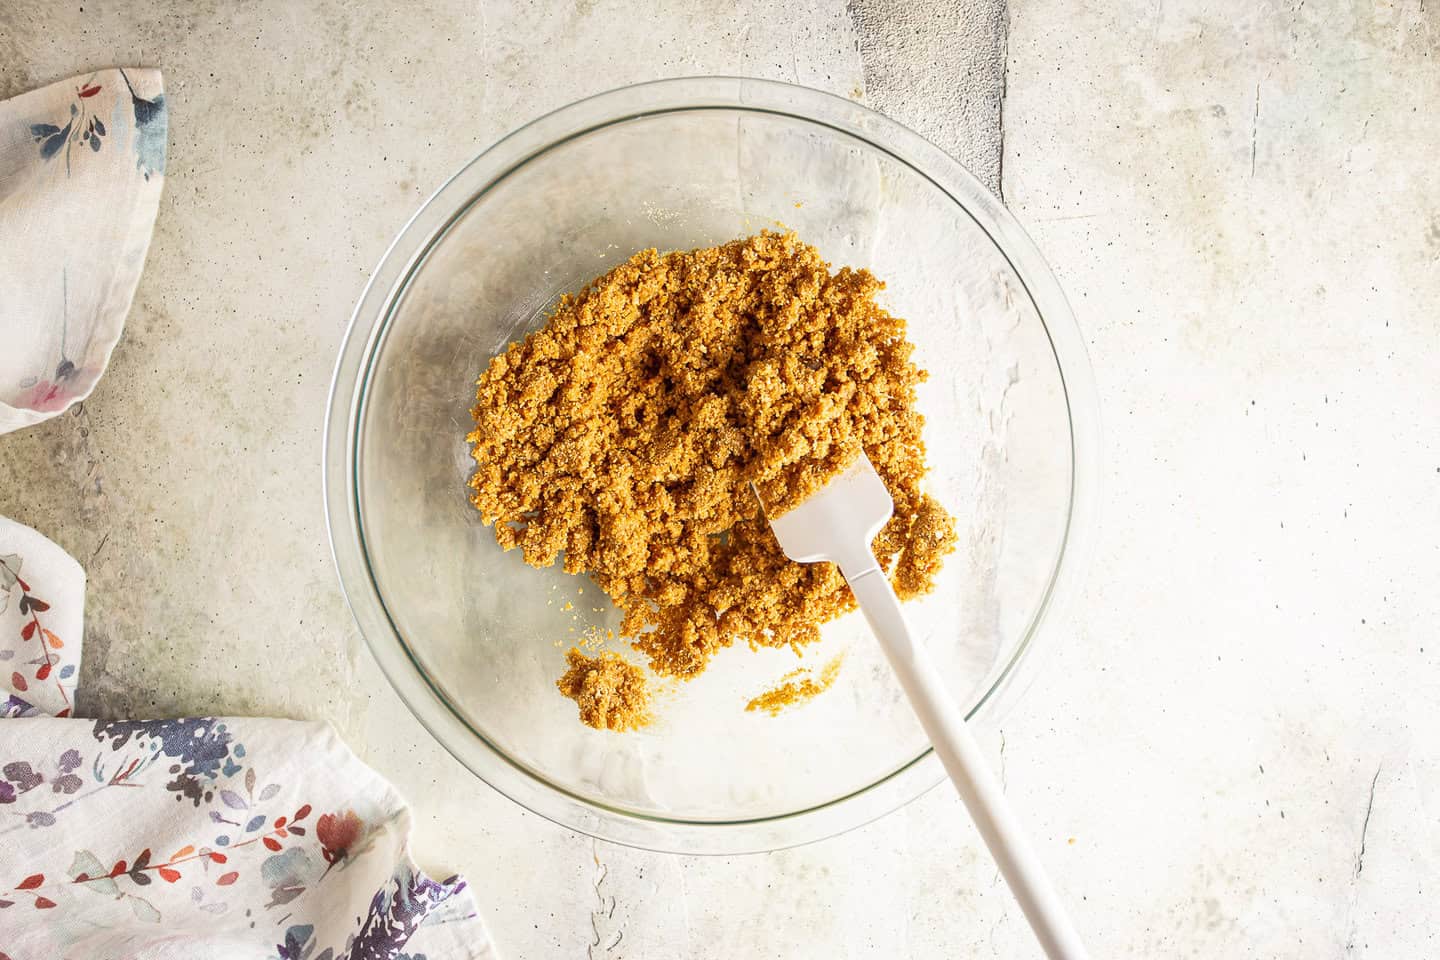 Mixing up Graham cracker crust in a large glass bowl.